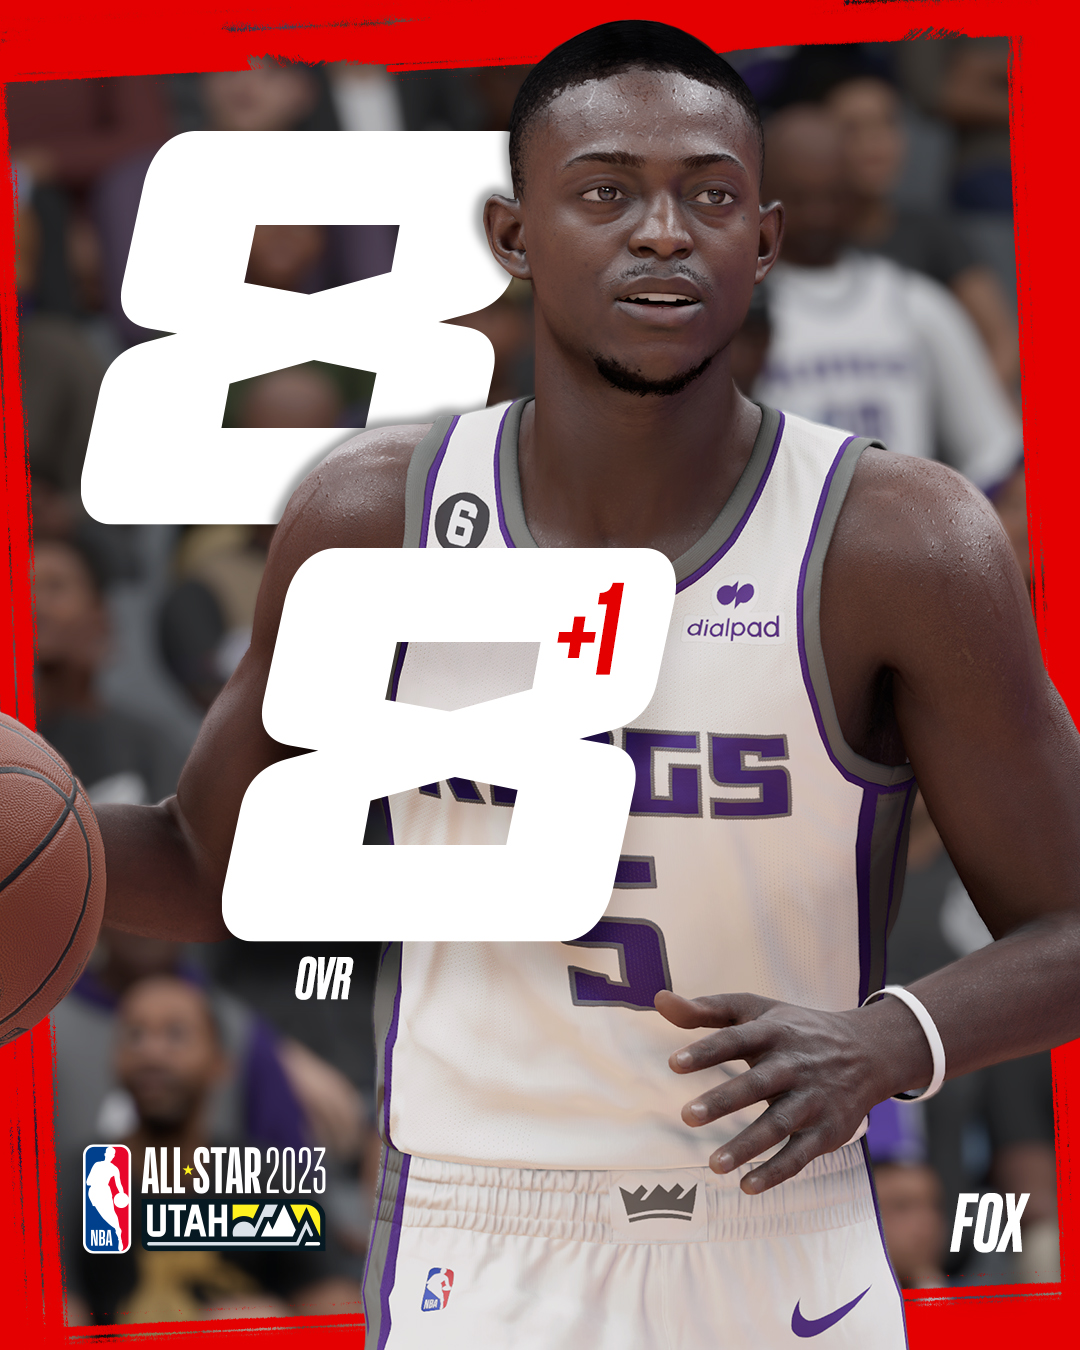 NBA 2K23 UPDATED PLAYER RATINGS FOR 2022-2023 Season March 9th New